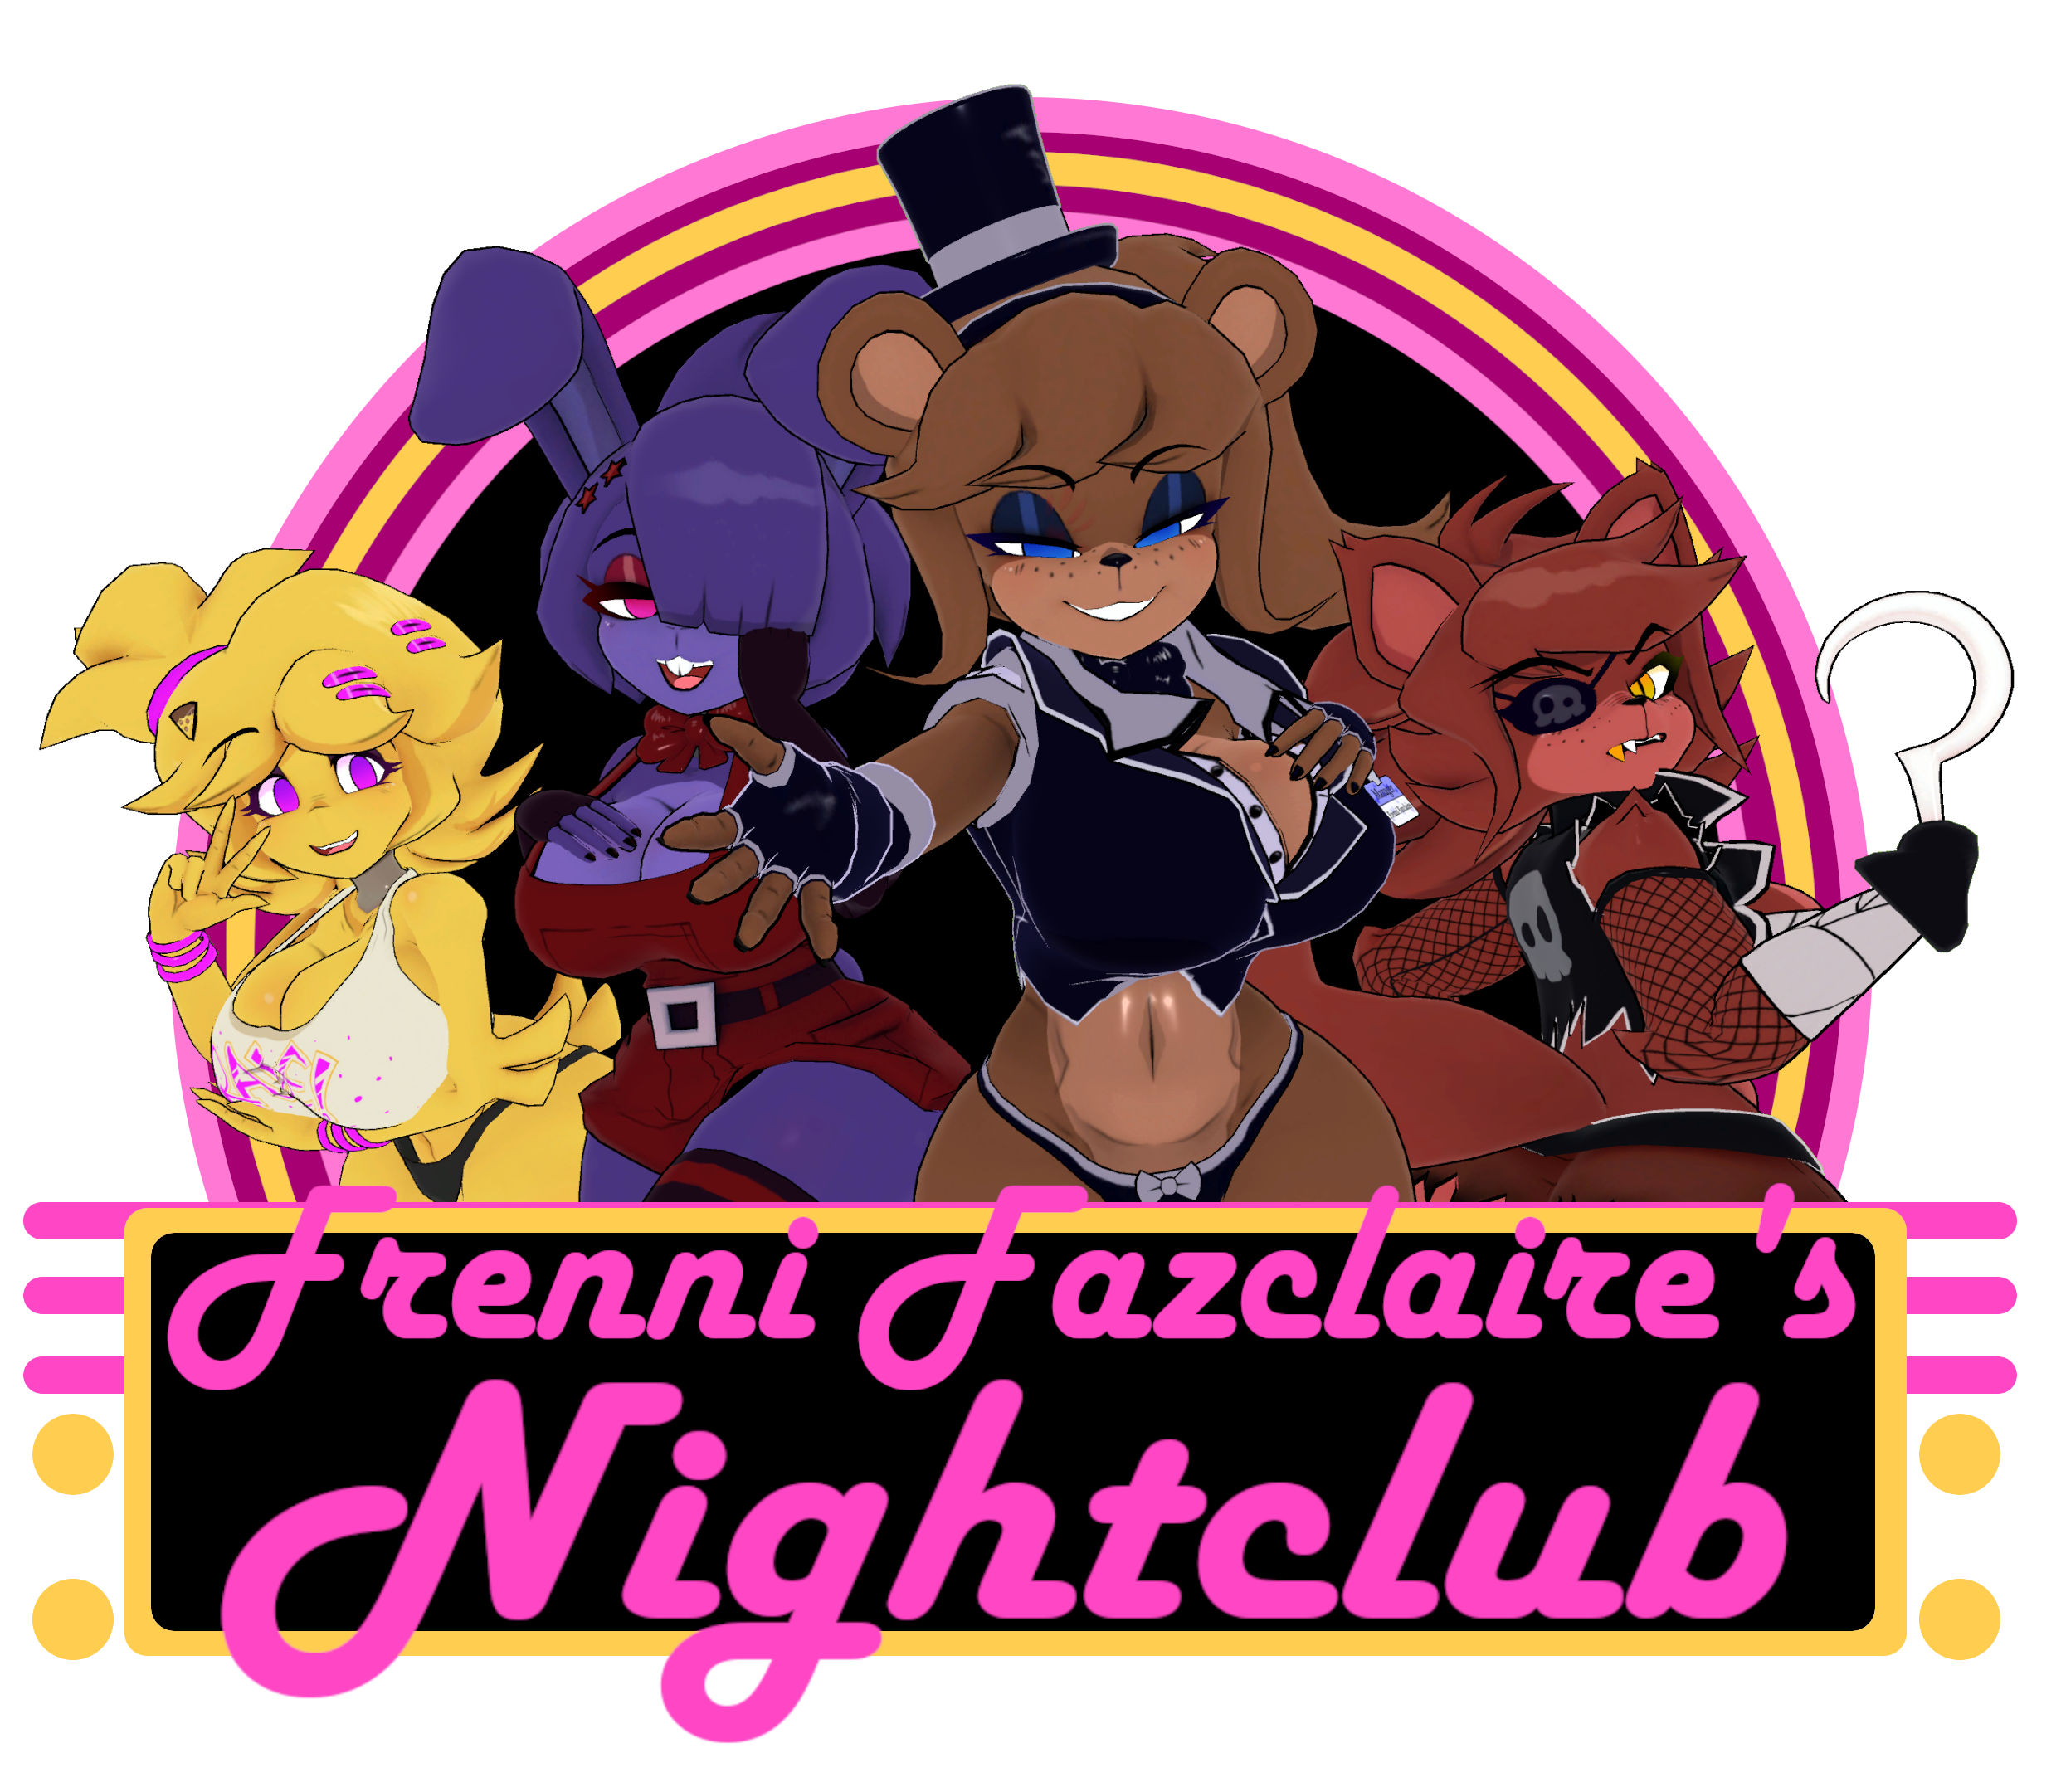 Five nights at fazclaire